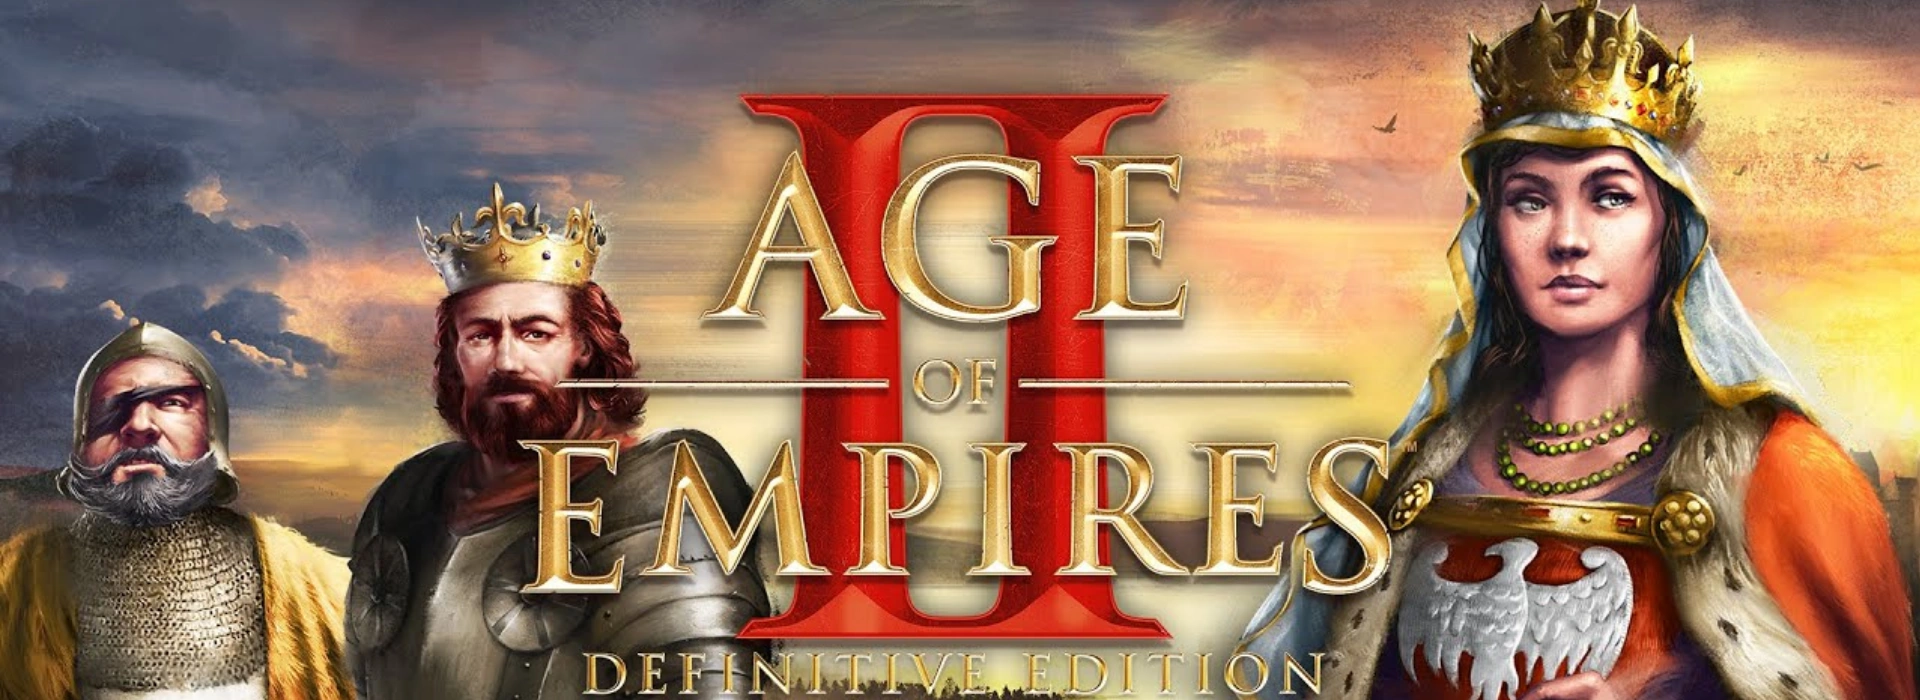 Age.of .Empires.2.banner3